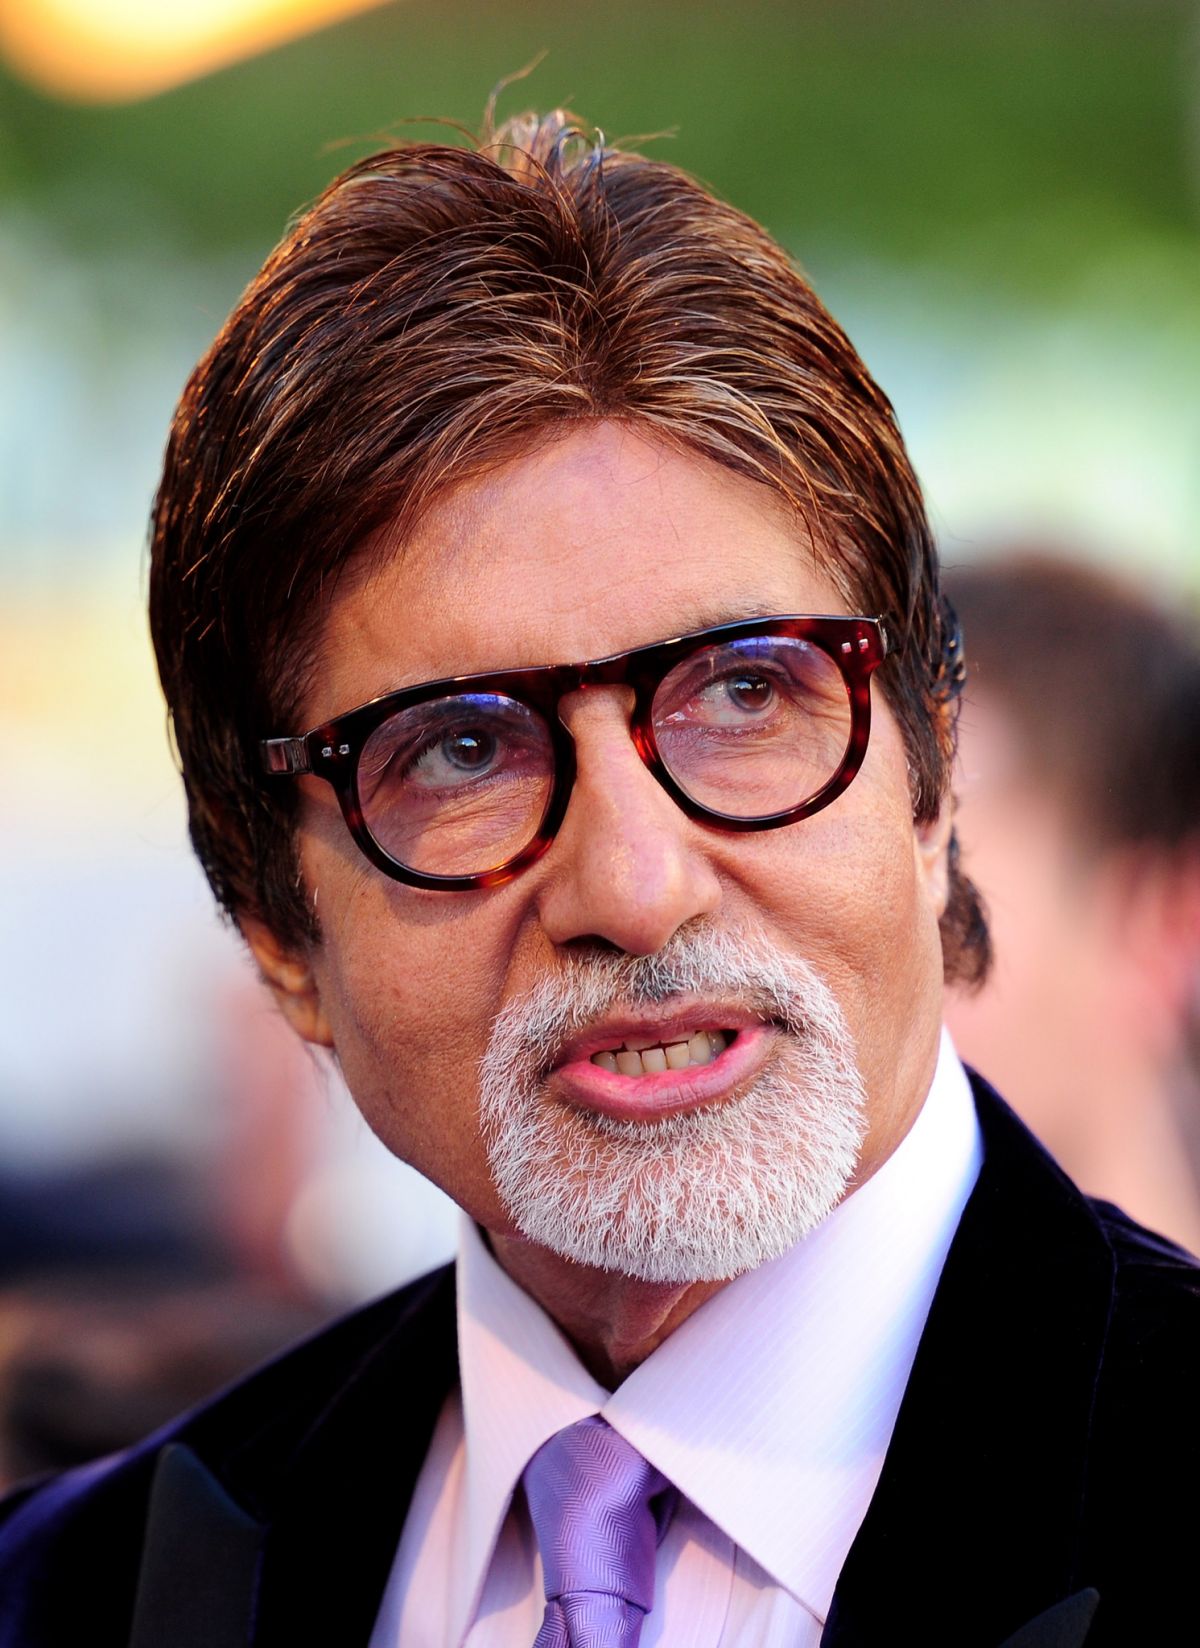 Amitabh Bachchan tweeted on 'Working from Home'